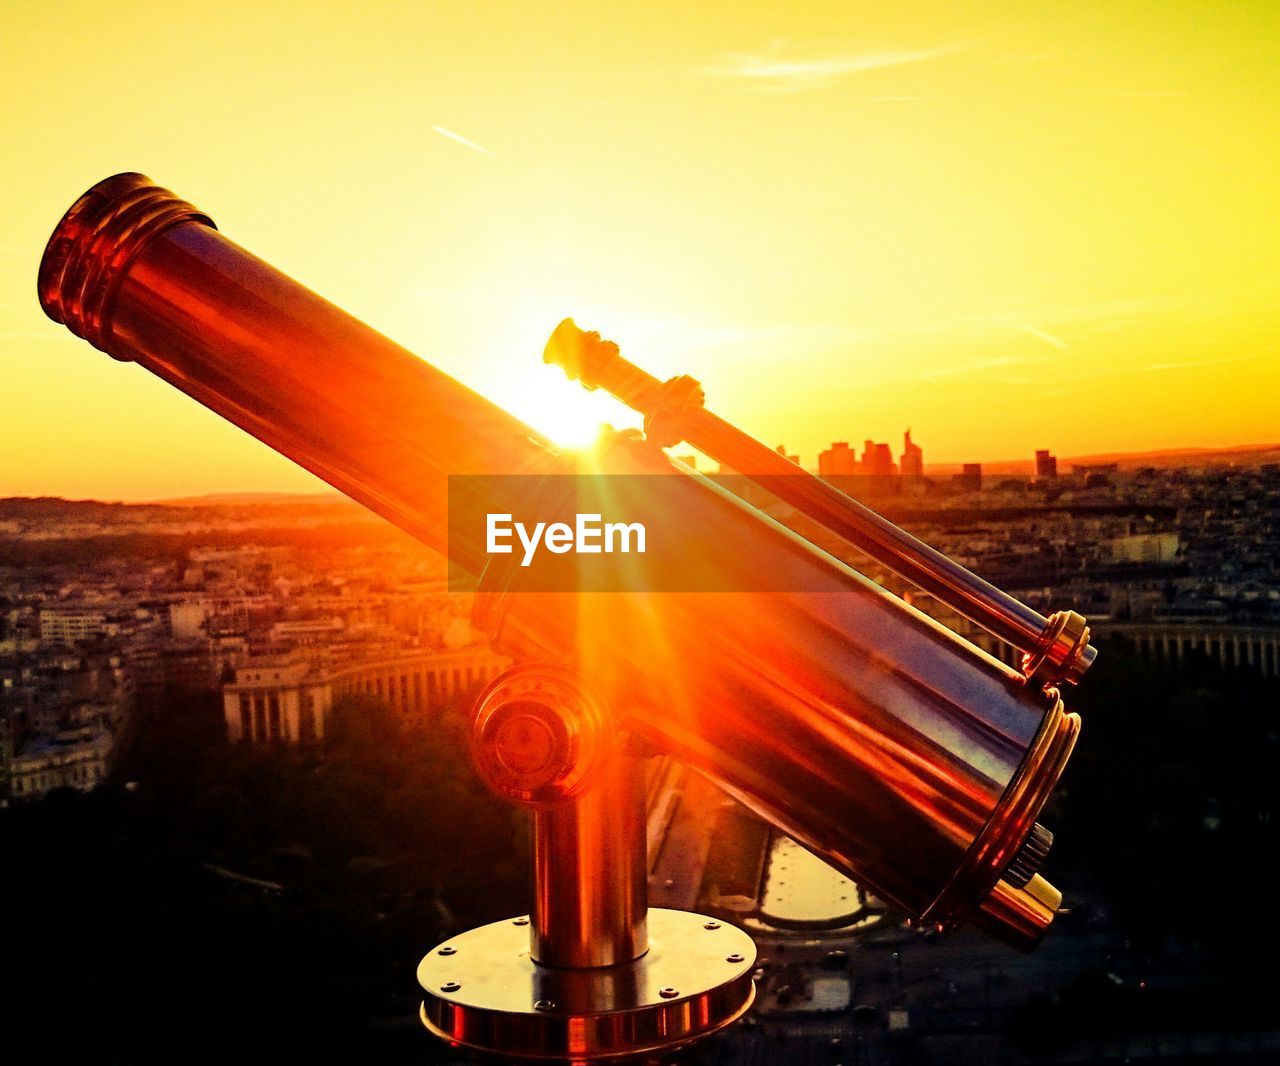 Close-up of binocular against cityscape during sunset